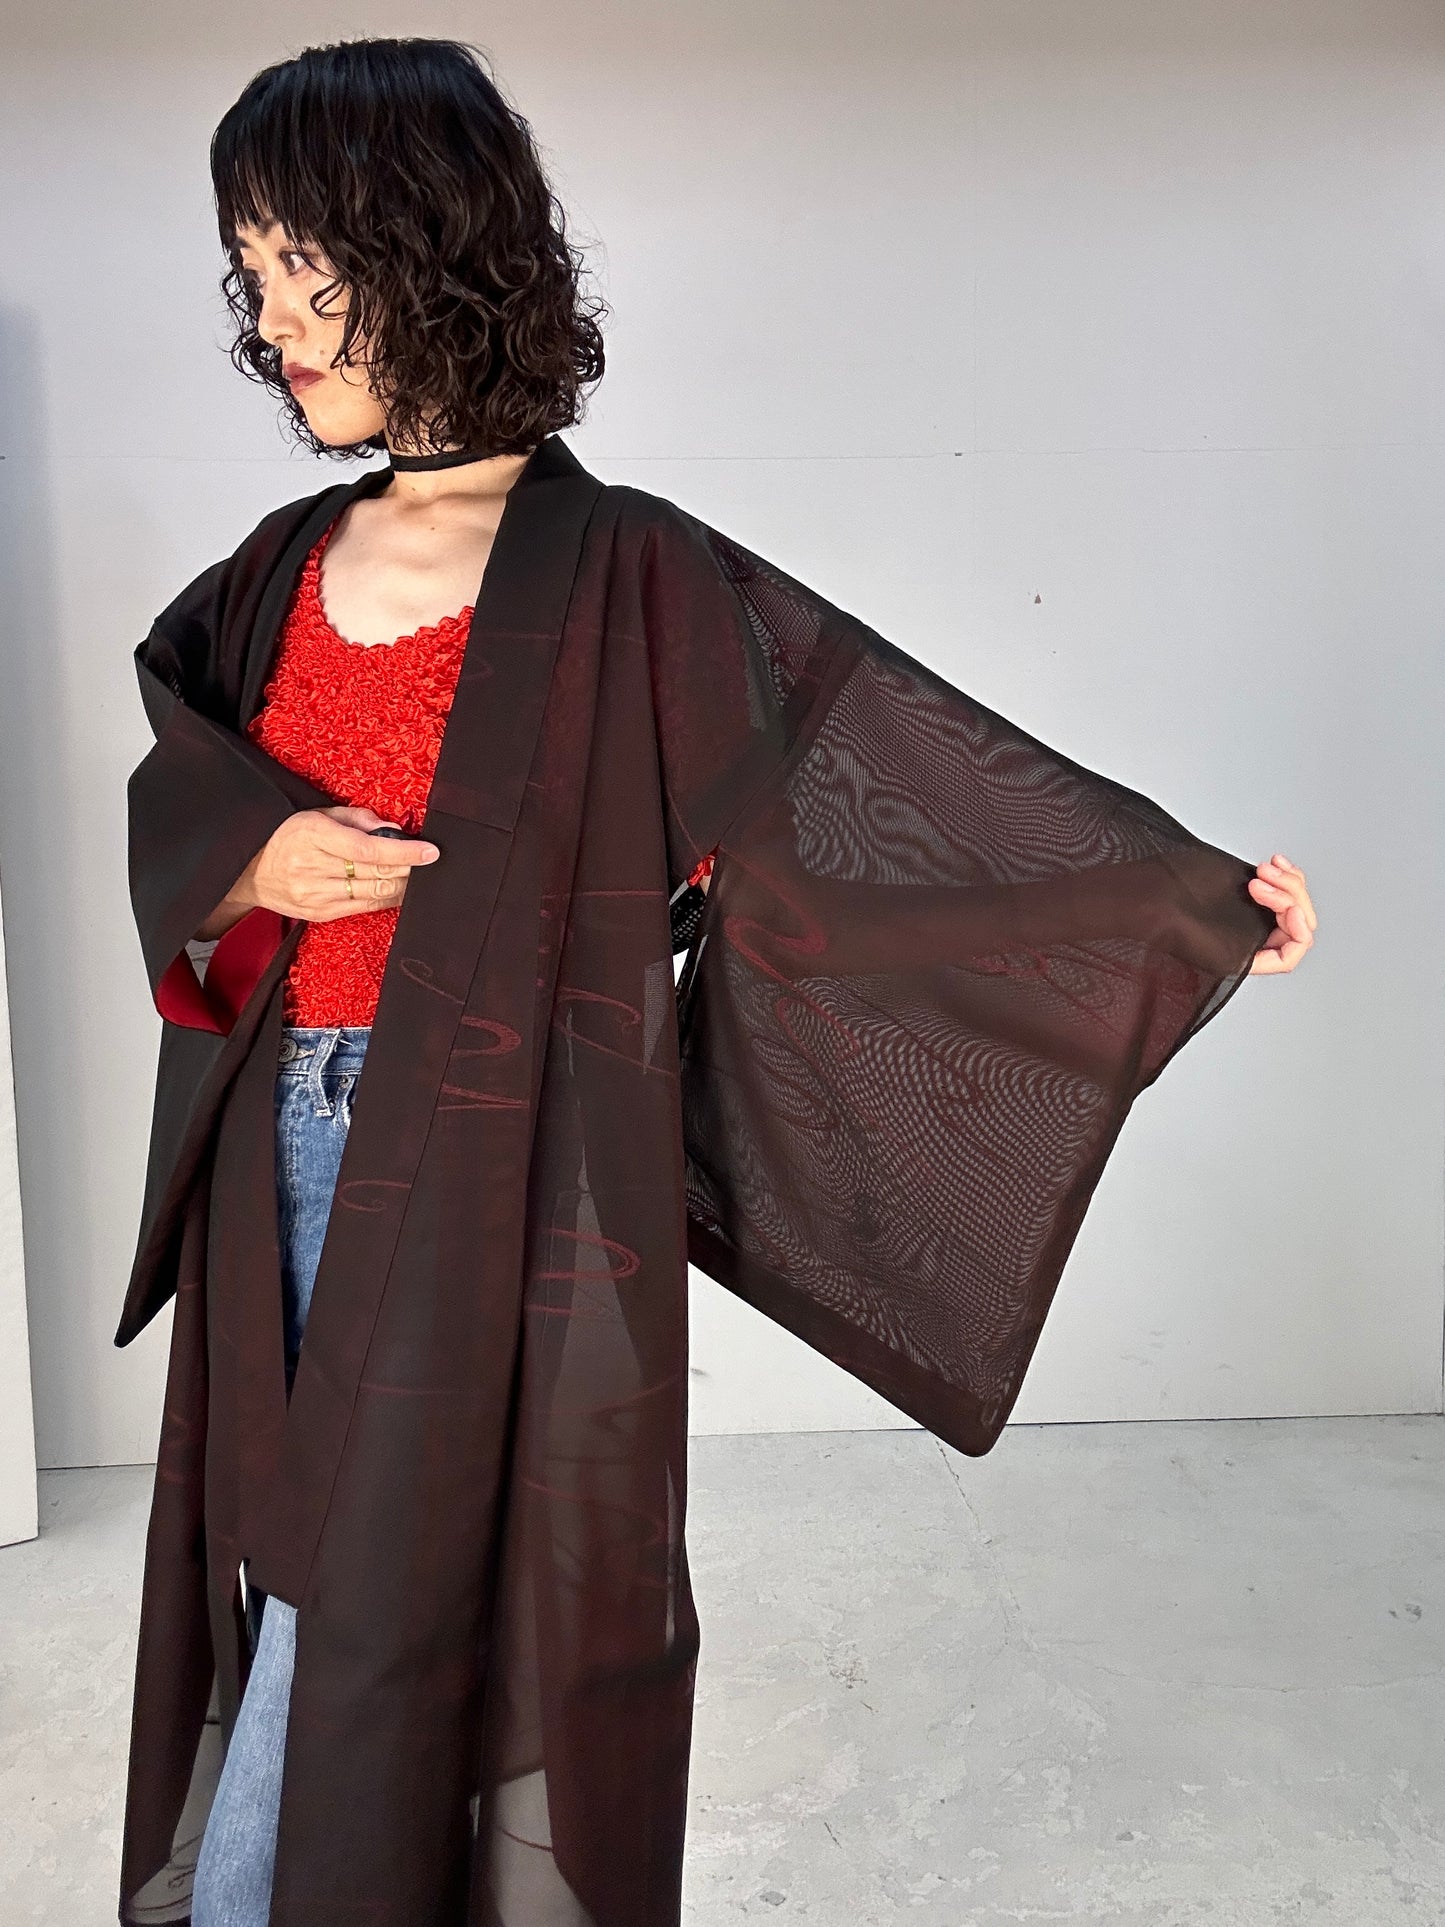 SHEER kimono dress gown and string belt upcycled from Japanese kimono